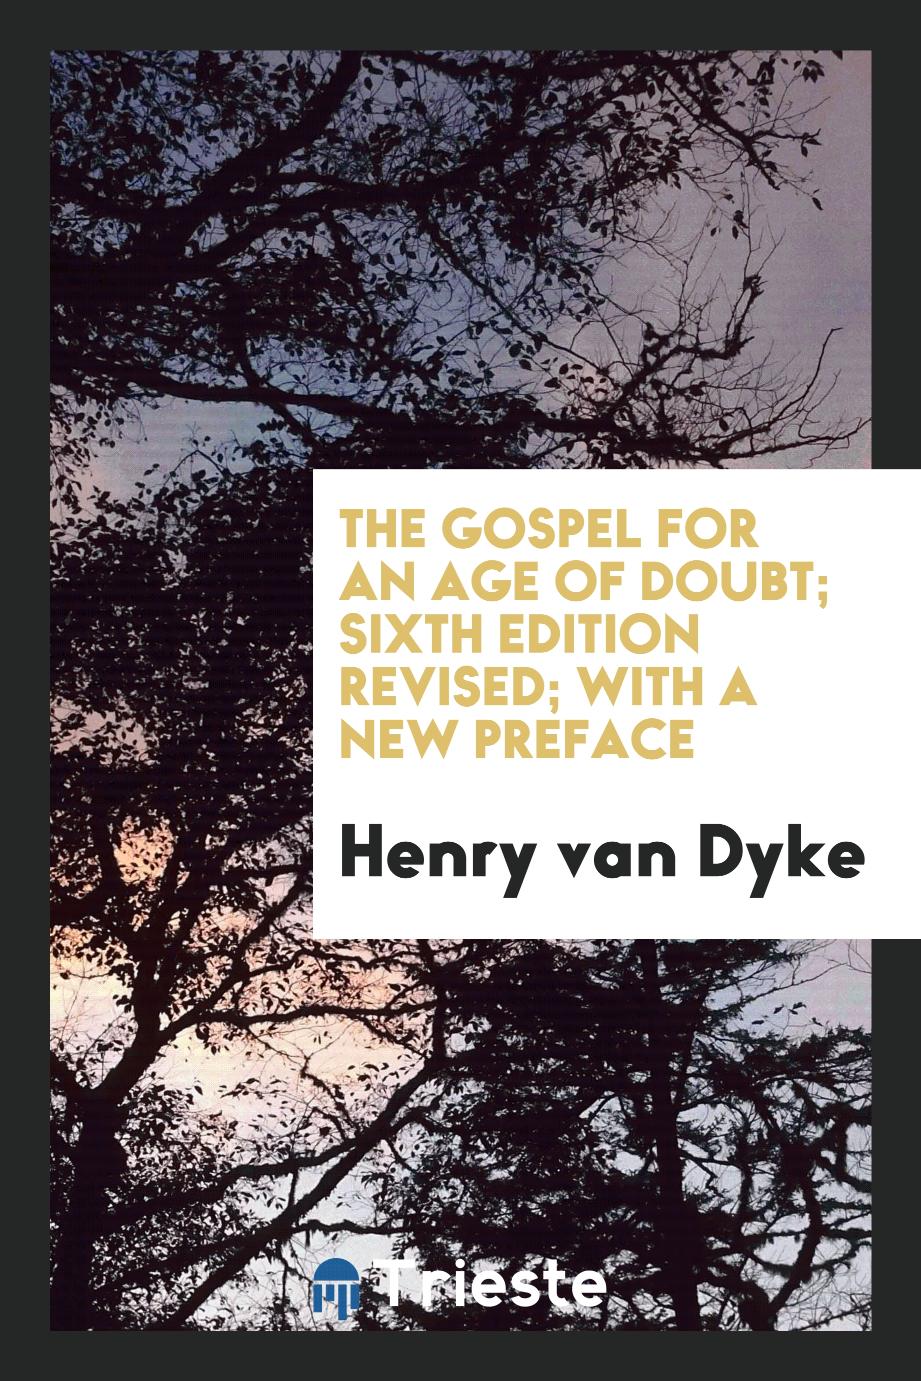 Henry van Dyke - The Gospel for an Age of Doubt; Sixth Edition Revised; With a New Preface